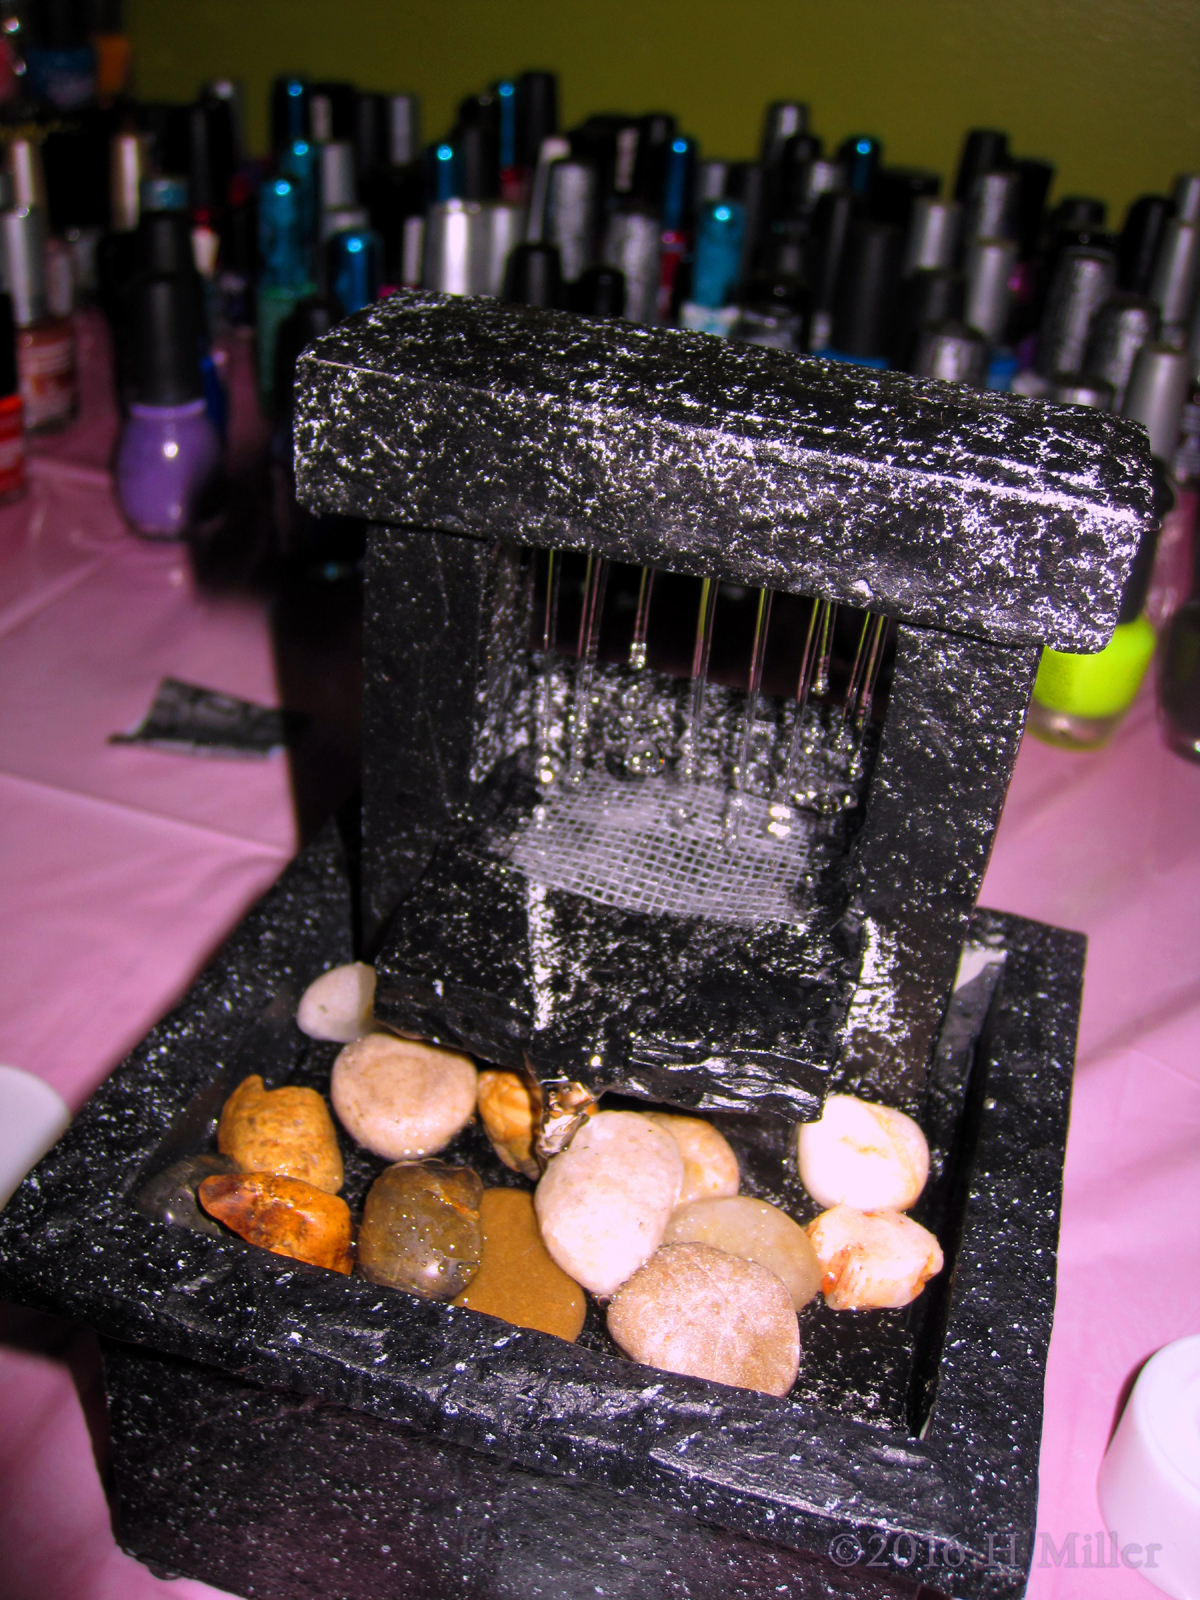 Pretty Fountain In Front Of The Nail Polish At The Nail Spa!